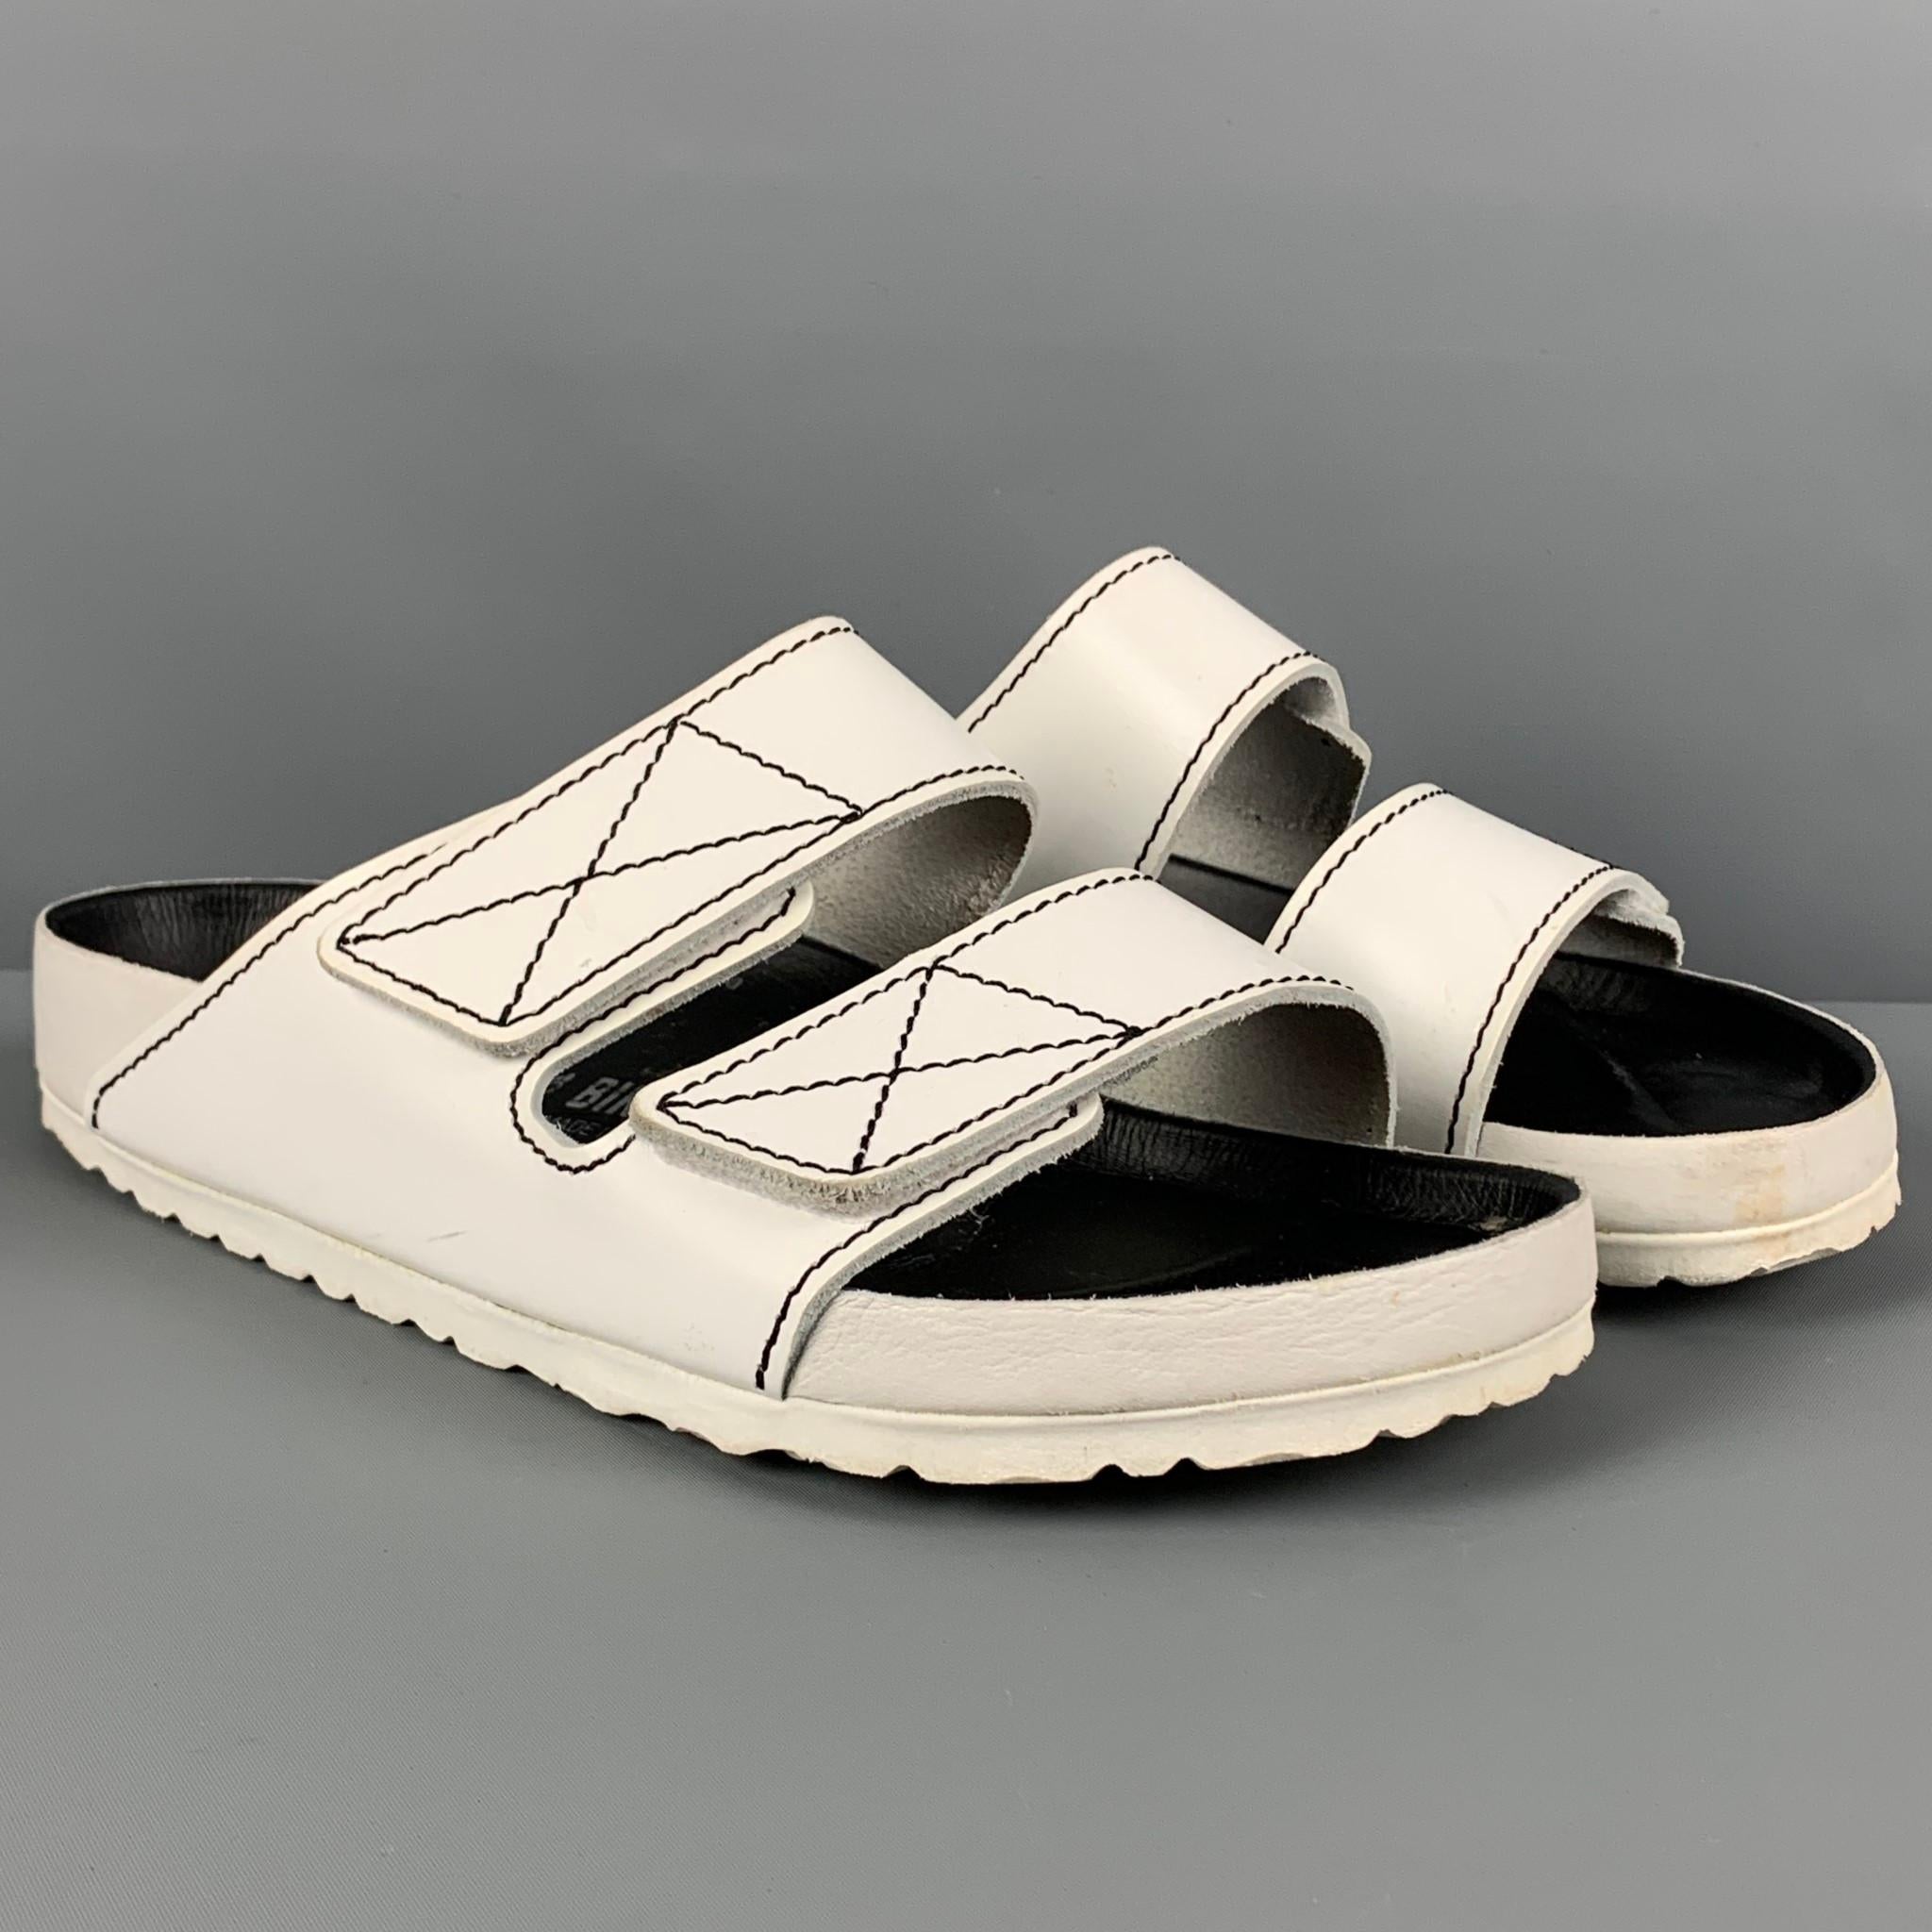 BIRKENSTOCK x PROENZA SCHOULER sandals comes in a white leather featuring a black contrast stitch detail and a hook & loop closure. 

Good Pre-Owned Condition. Light wear. As-Is.
Marked: 42 270 L11 M9
Original Retail Price: $420.00

Outsole: 11.25